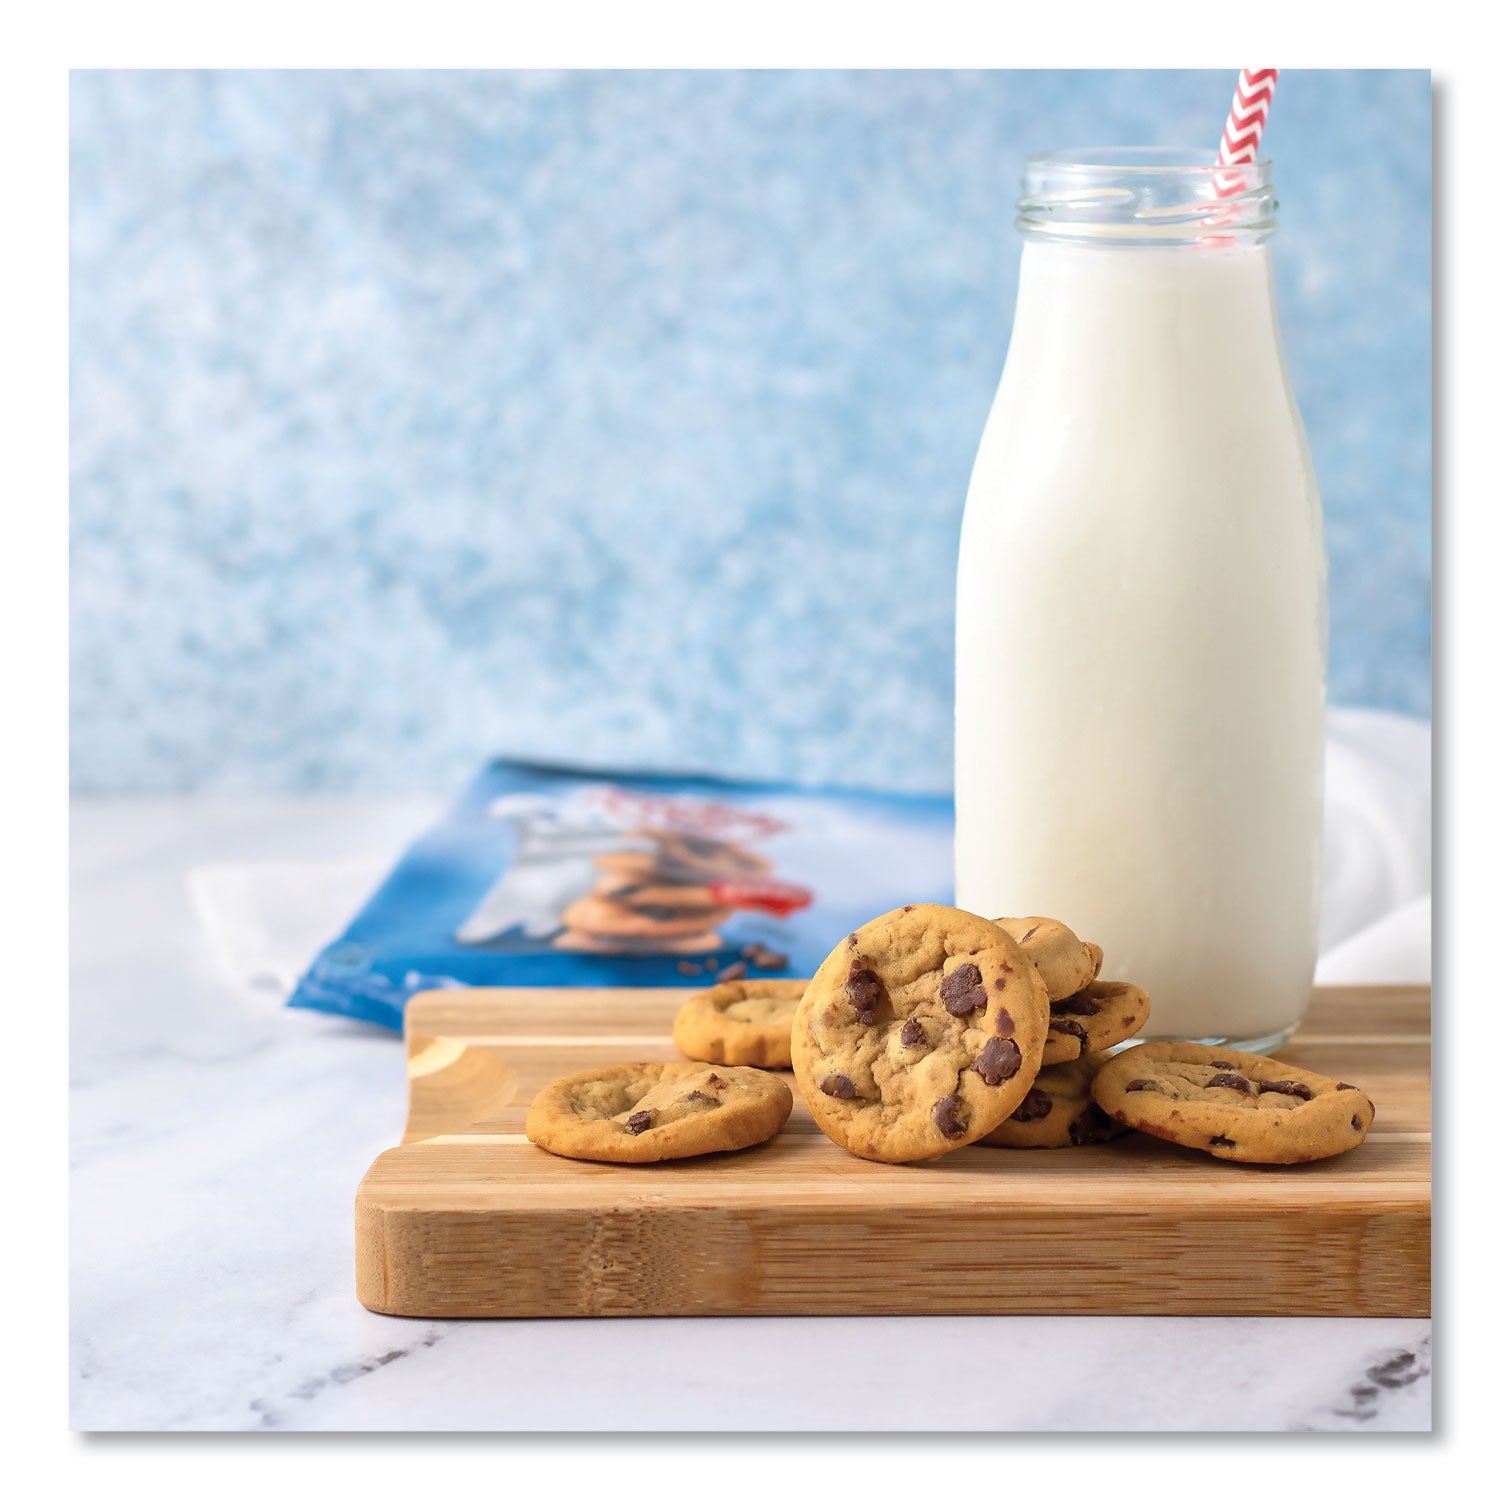 soft-baked-mini-chocolate-chip-cookies-15-oz-pouch-28-pack-ships-in-1-3-business-days_grr22002056 - 6